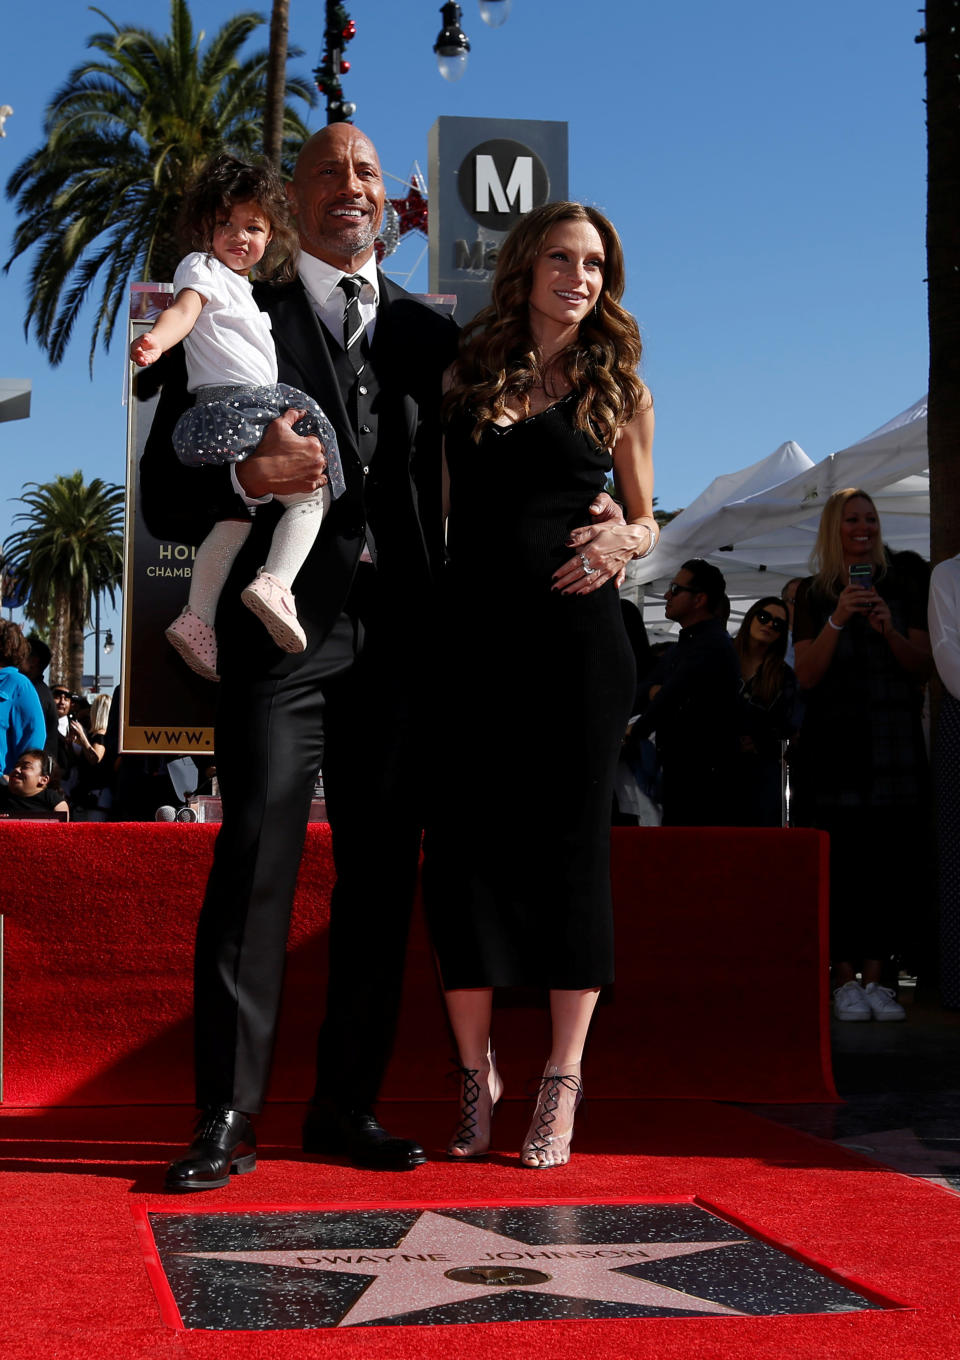 Actor Dwayne Johnson poses on his star with Lauren Hashian and their daughter Jasmine Lia after it was unveiled on the Hollywood Walk of Fame in Los Angeles, California, U.S., December 13, 2017.